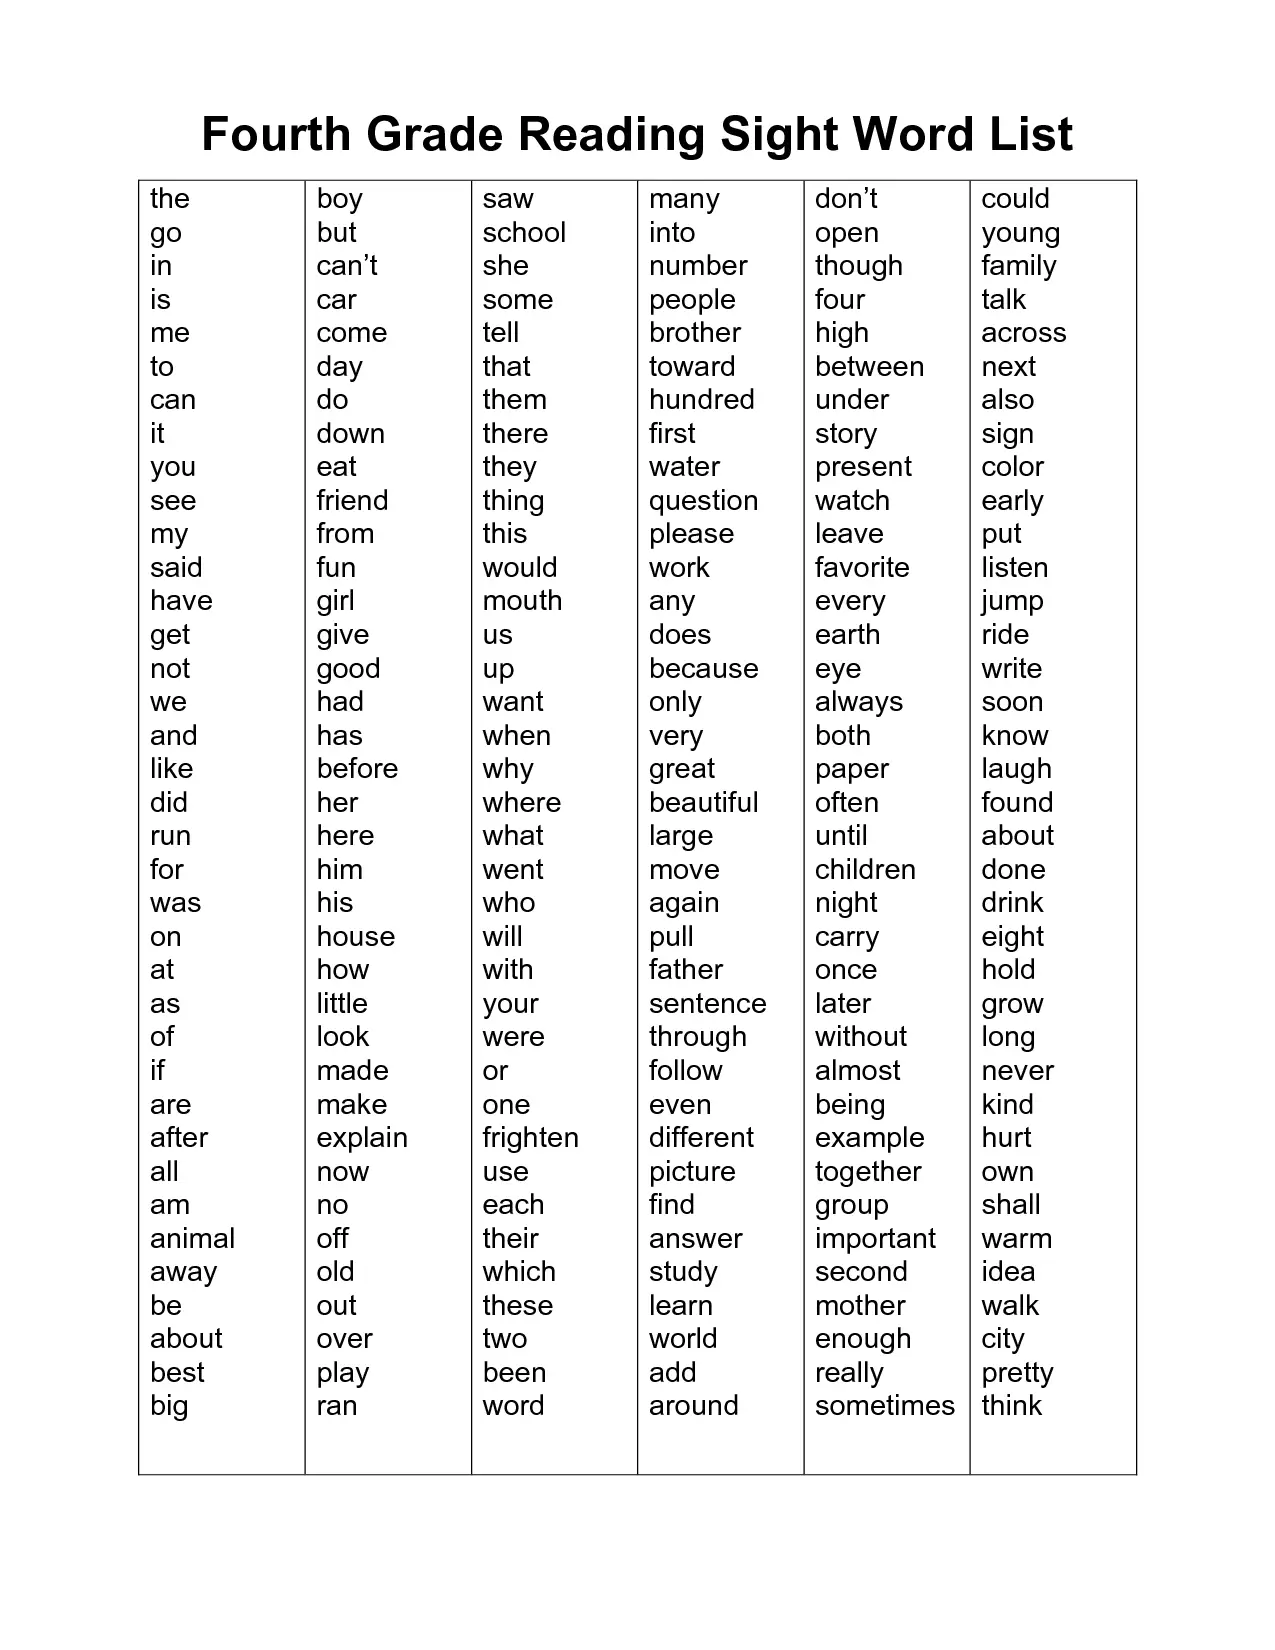 4th grade sight words dolch list